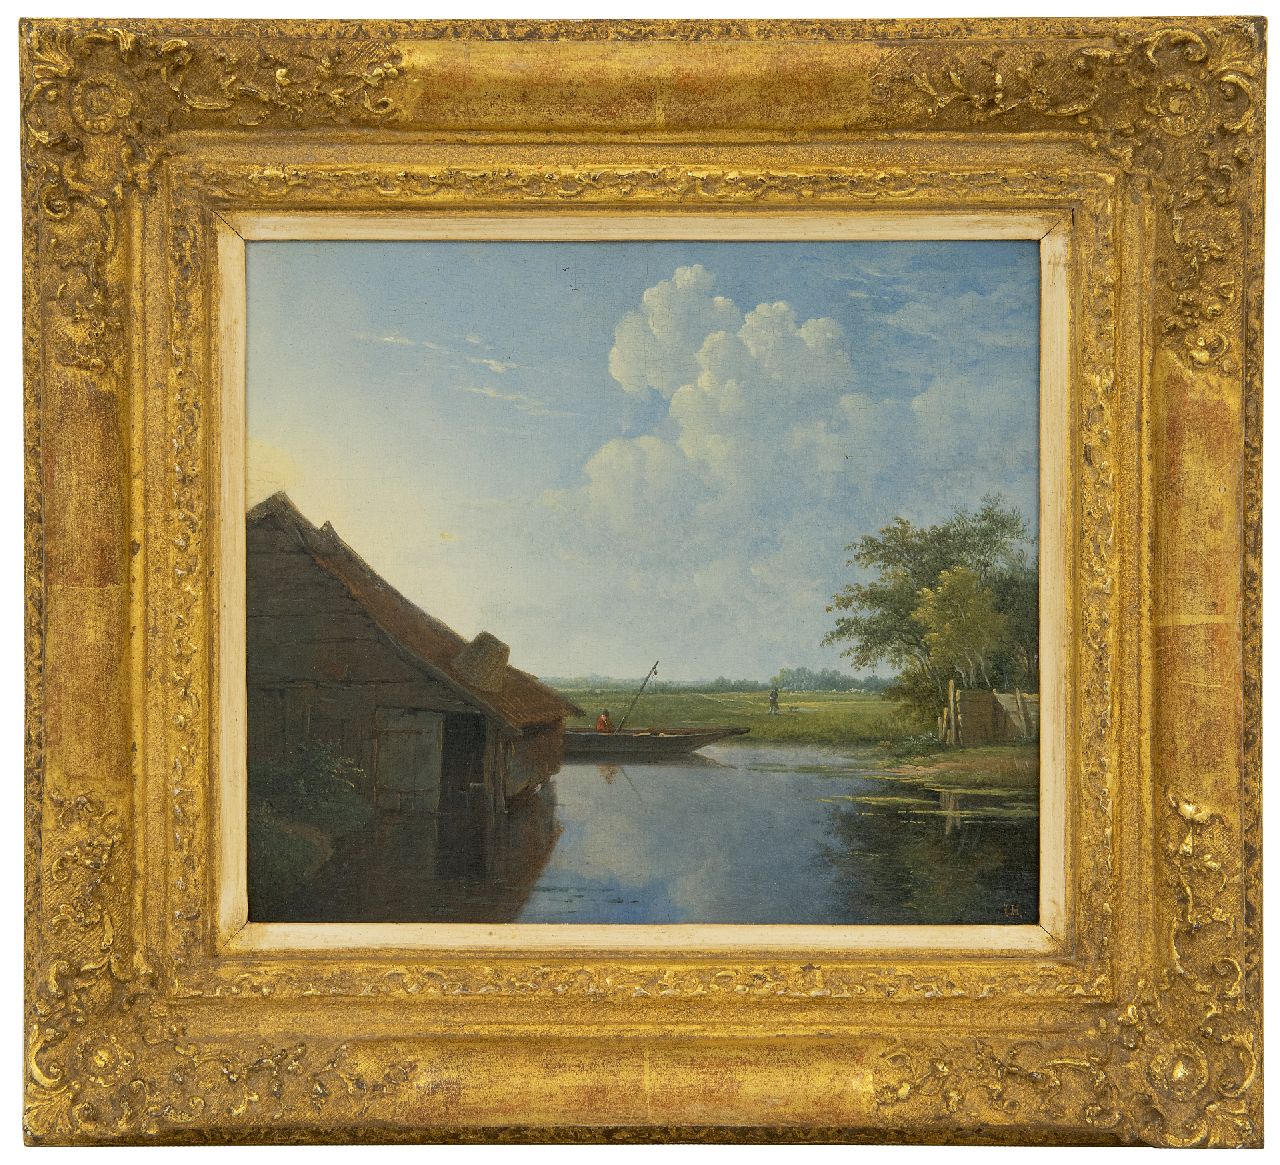 Hilverdink J.  | Johannes Hilverdink | Paintings offered for sale | An angler in a river landscape, oil on panel 20.8 x 23.7 cm, signed l.r. with initials